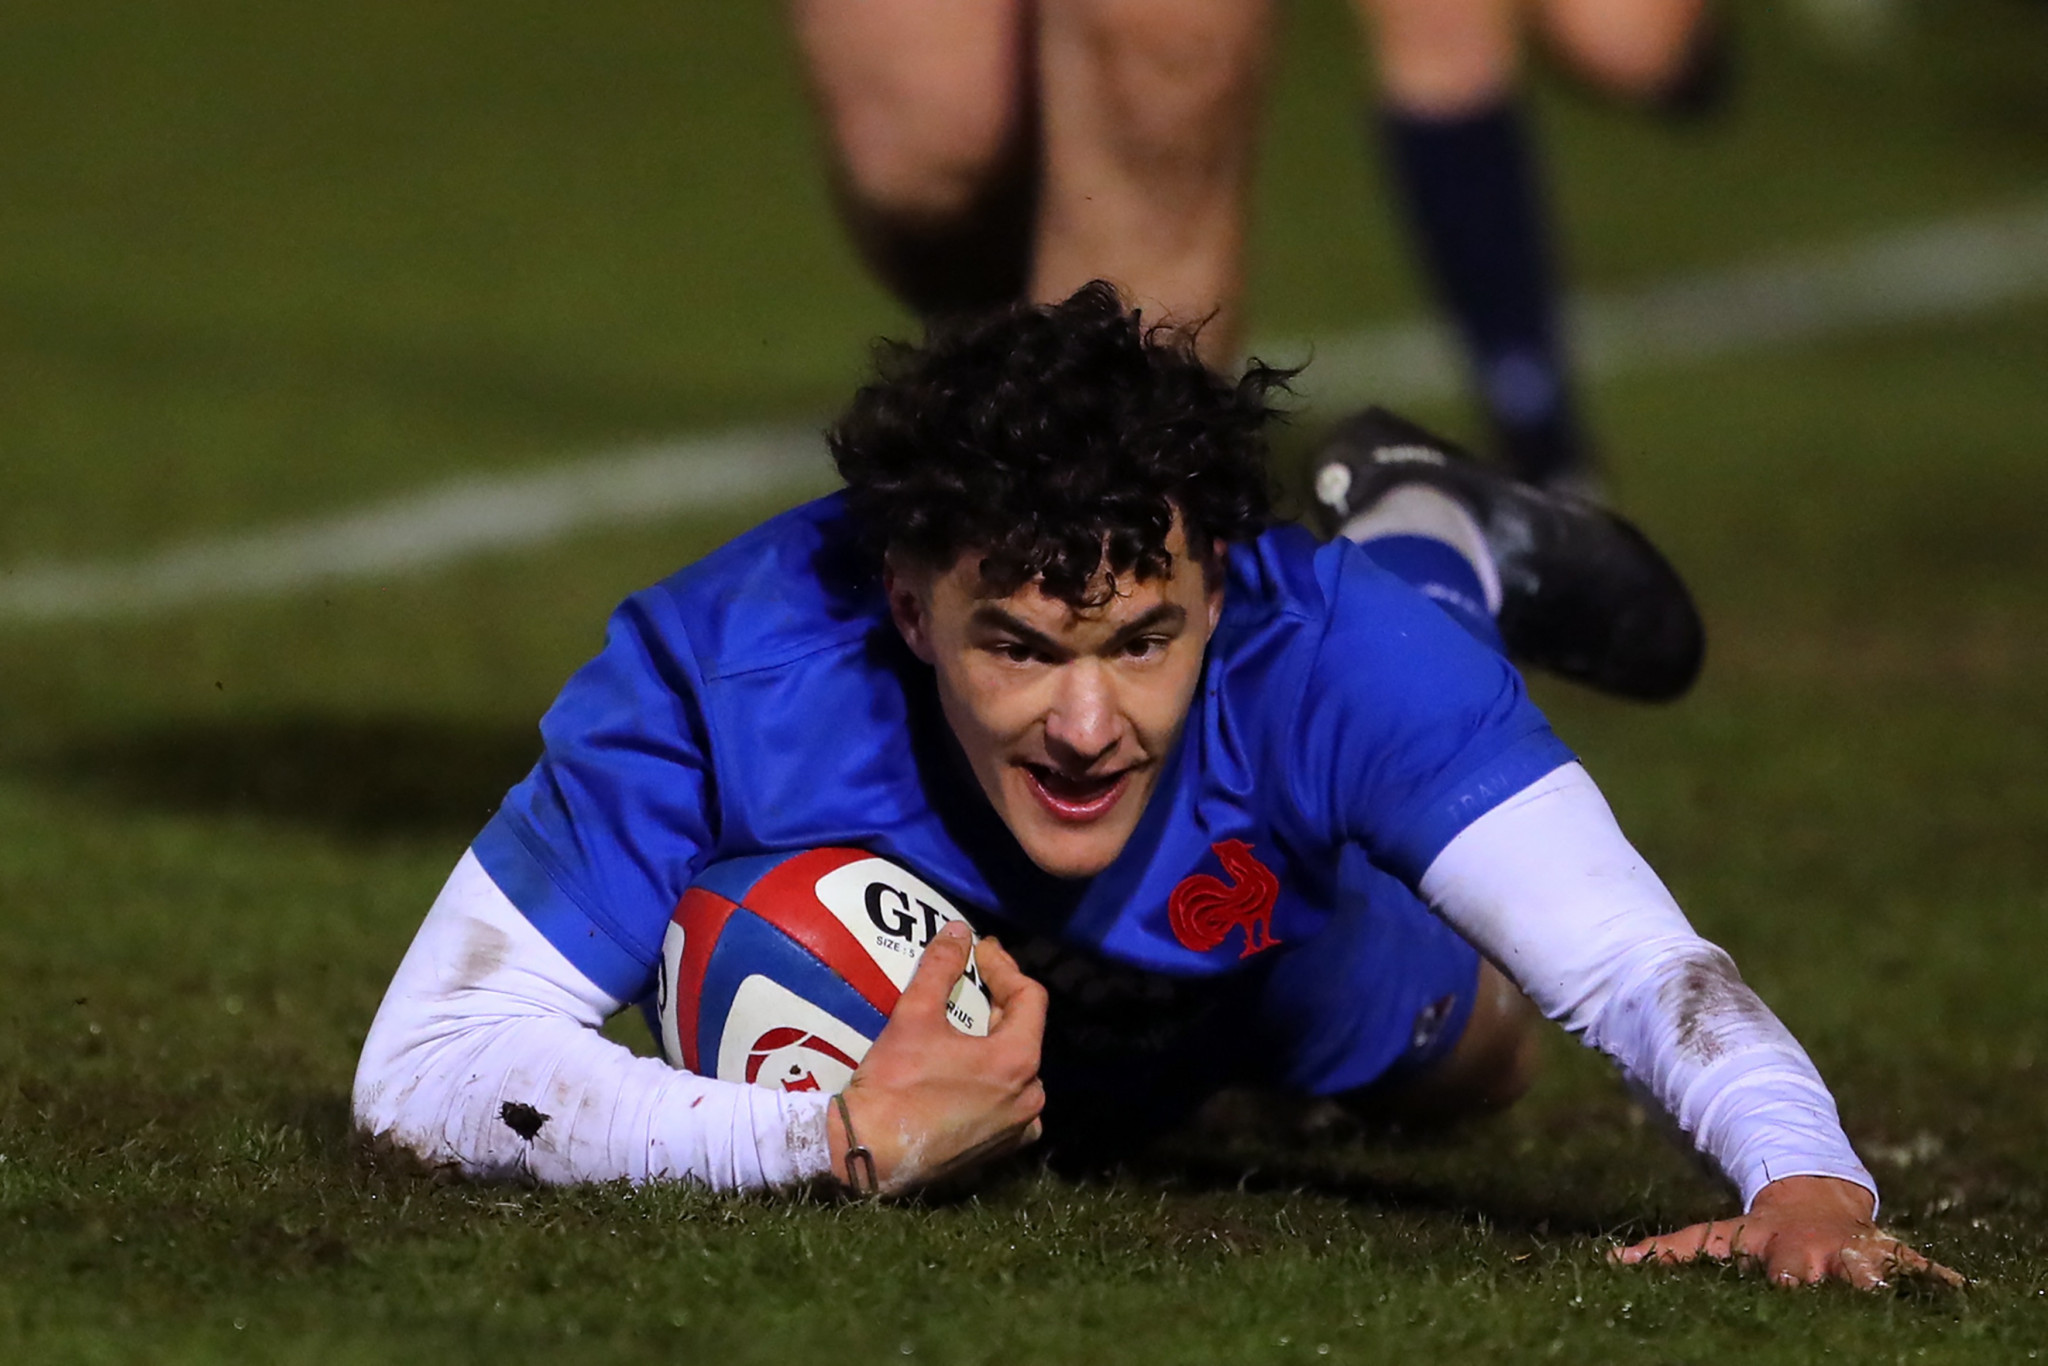 Leo Drouet was among the try scorers as France beat Ireland to win the World Rugby Under-20 Championship crown in South Africa ©Getty Images